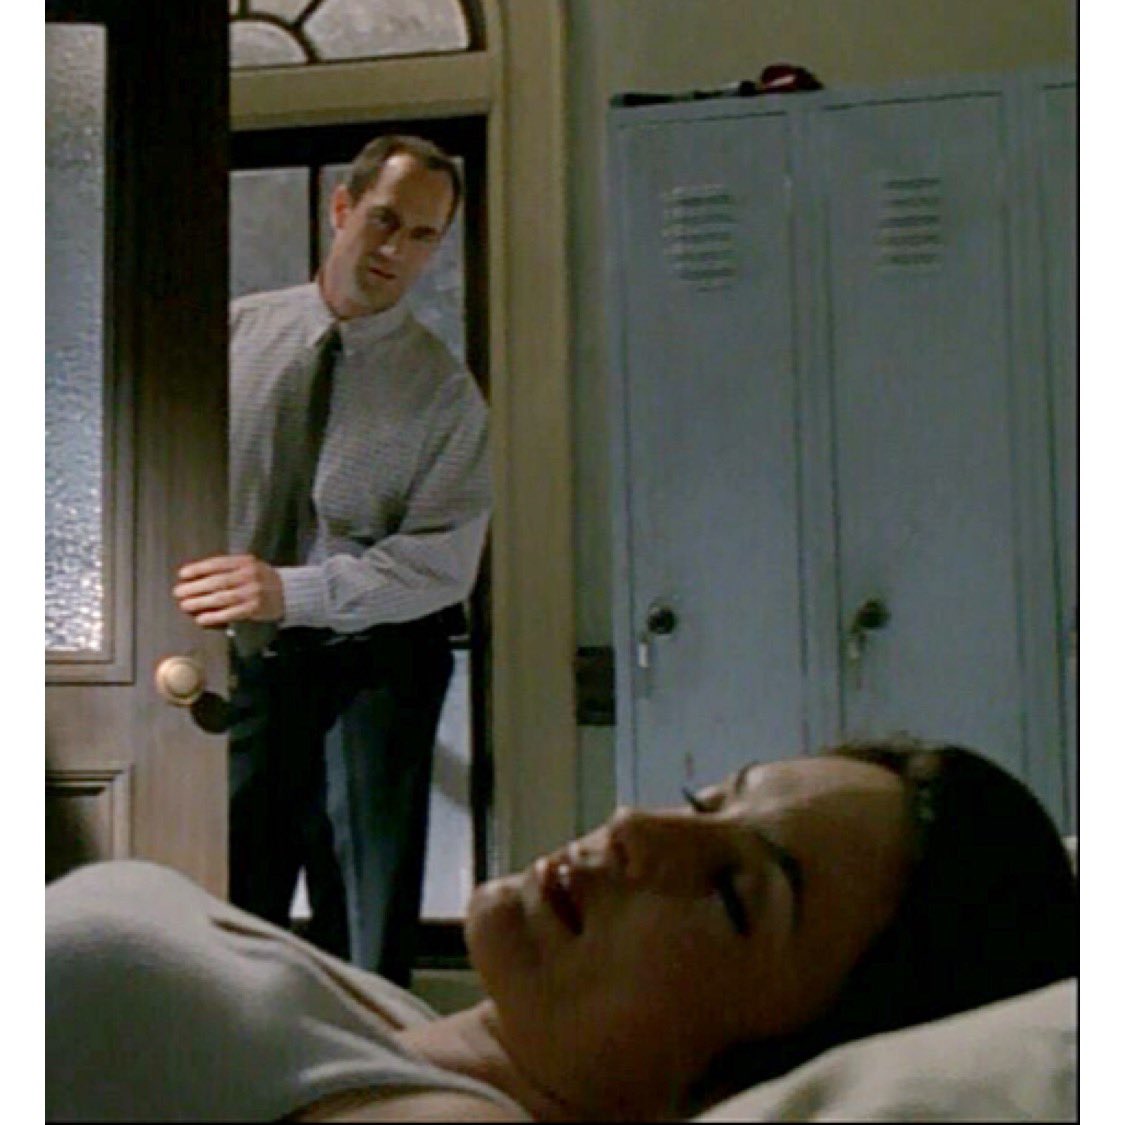 It’s #NationalNappingDay so go ahead and take a nap!😴
#NationalNappingDay2019
#NationalNapDay #NapDay 
#MariskaHargitay #ChrisMeloni #RobertJohnBurke #SVU